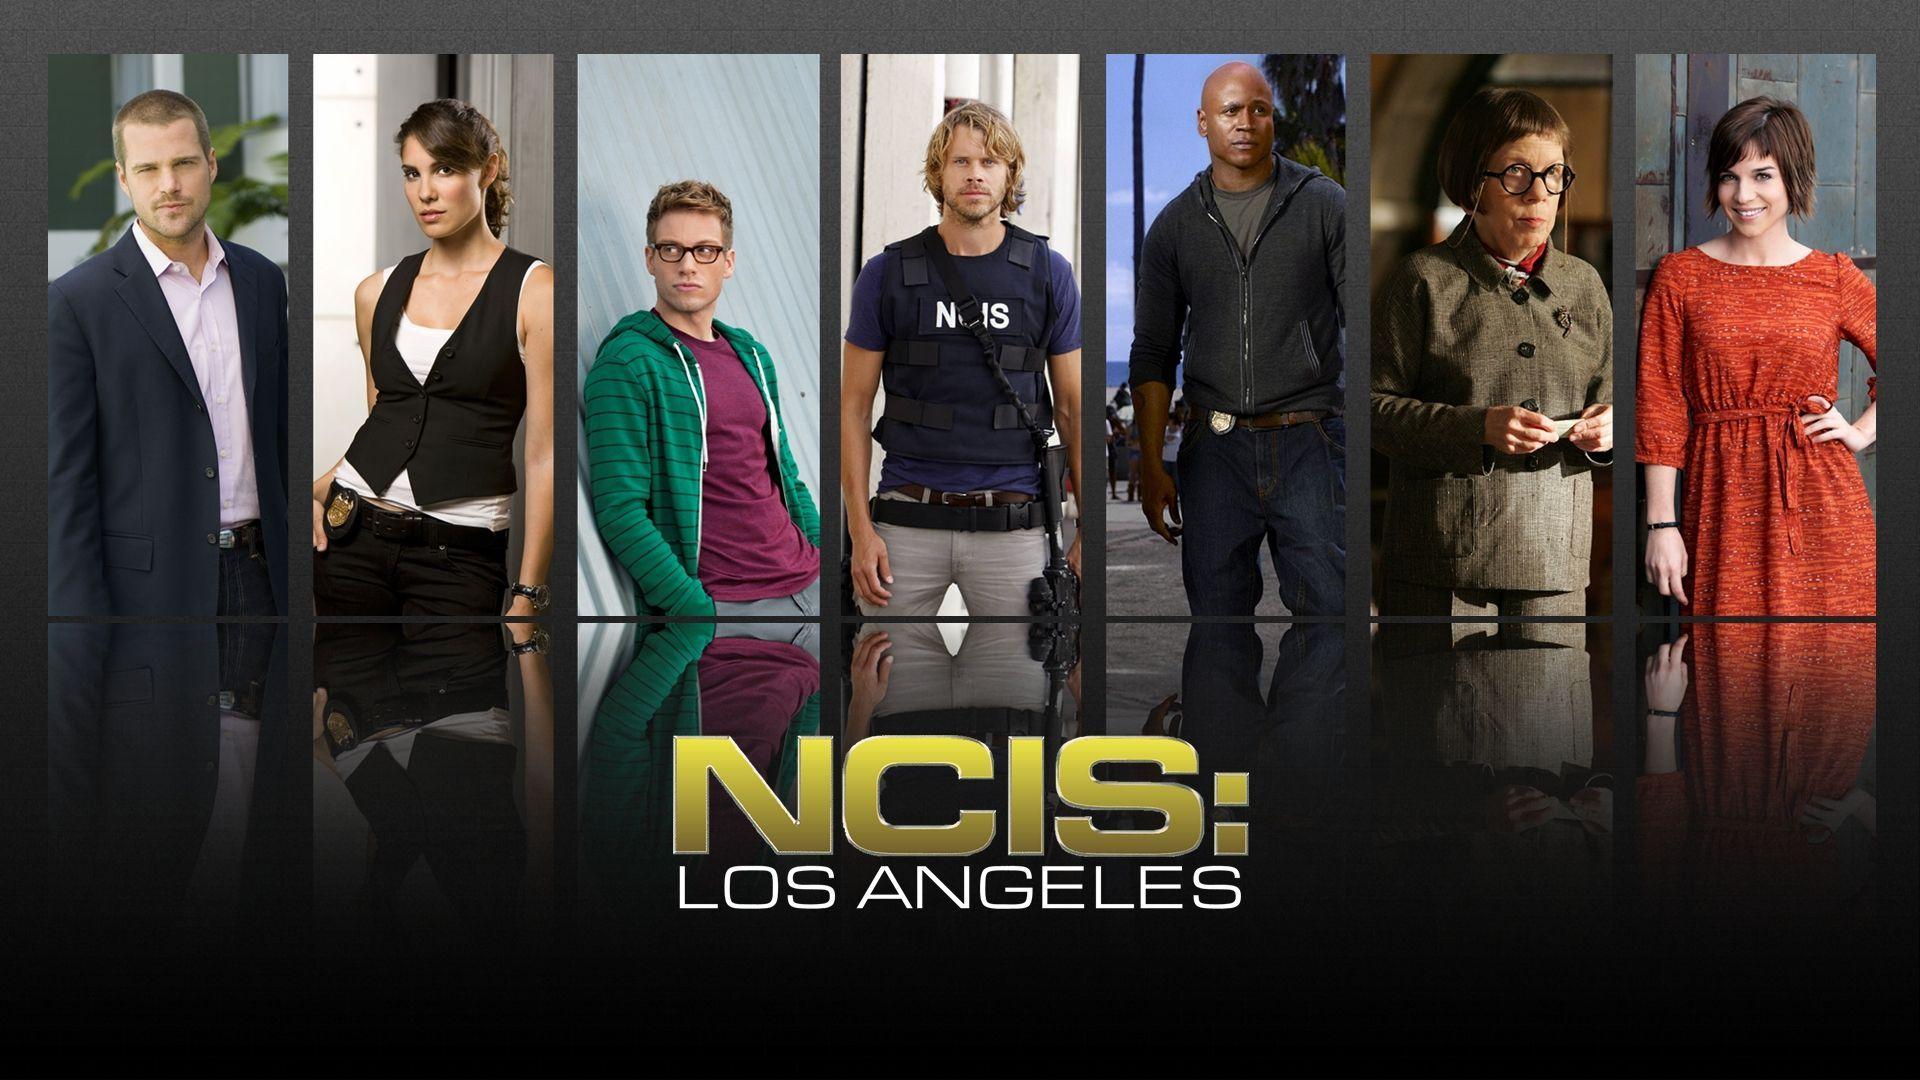 Ncis: Los Angeles Wallpapers